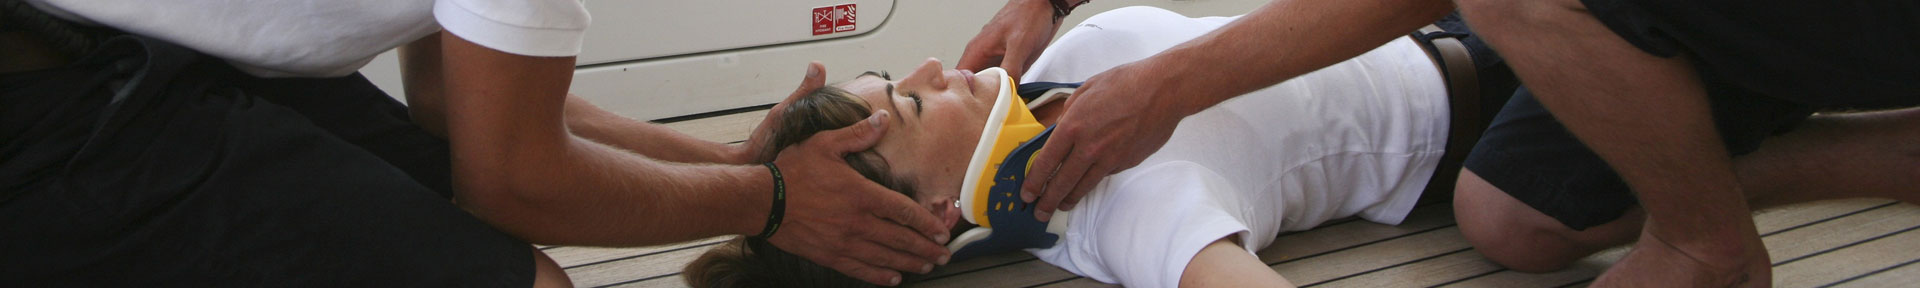 A casualty in a neck brace receiving medical attention